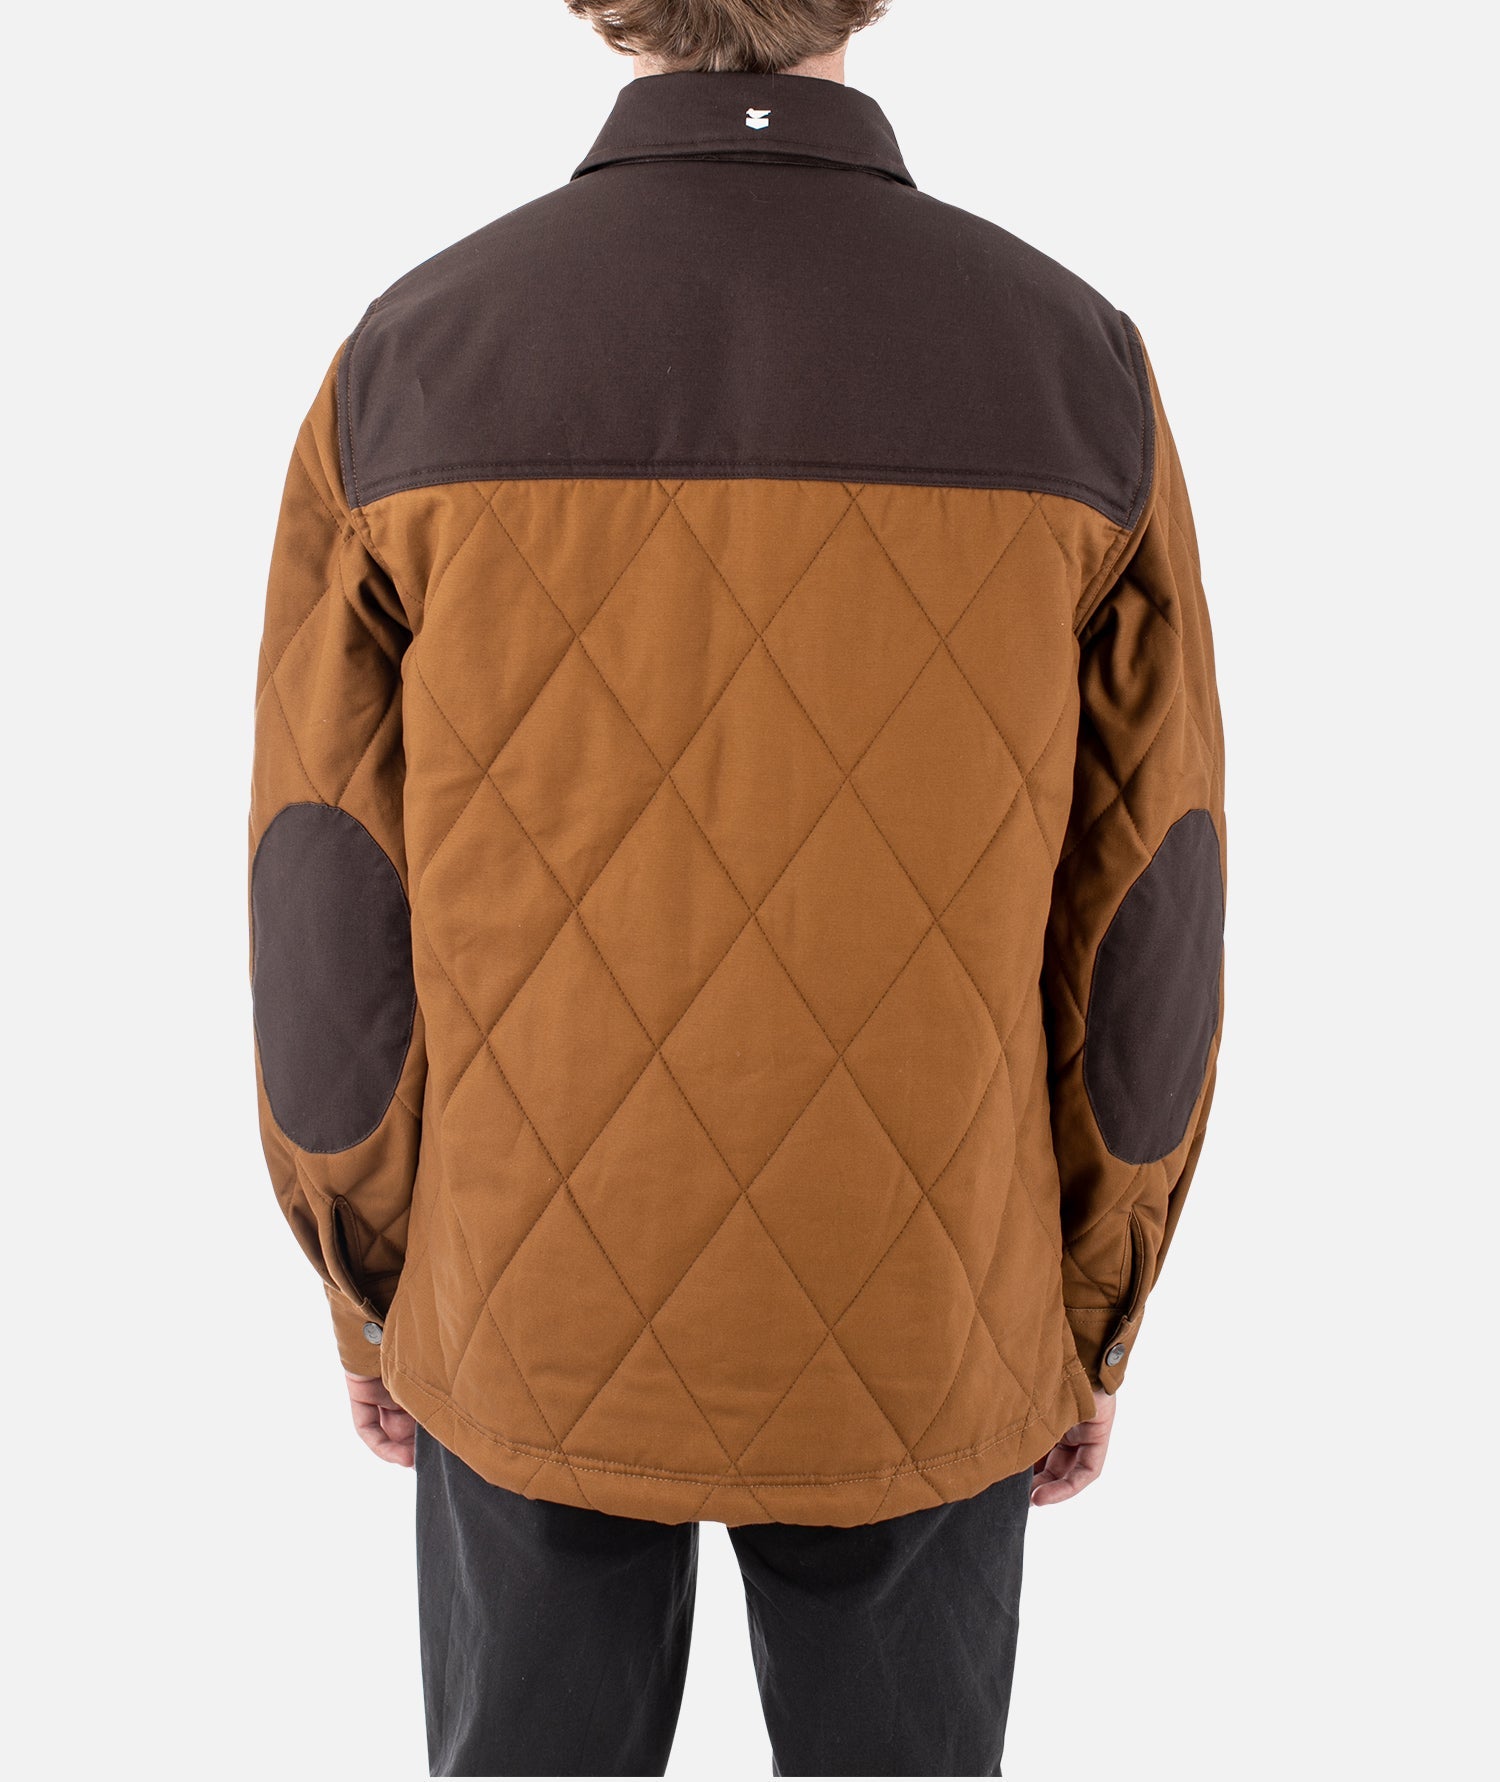 Jetty Dogwood Quilted Jacket - 88 Gear